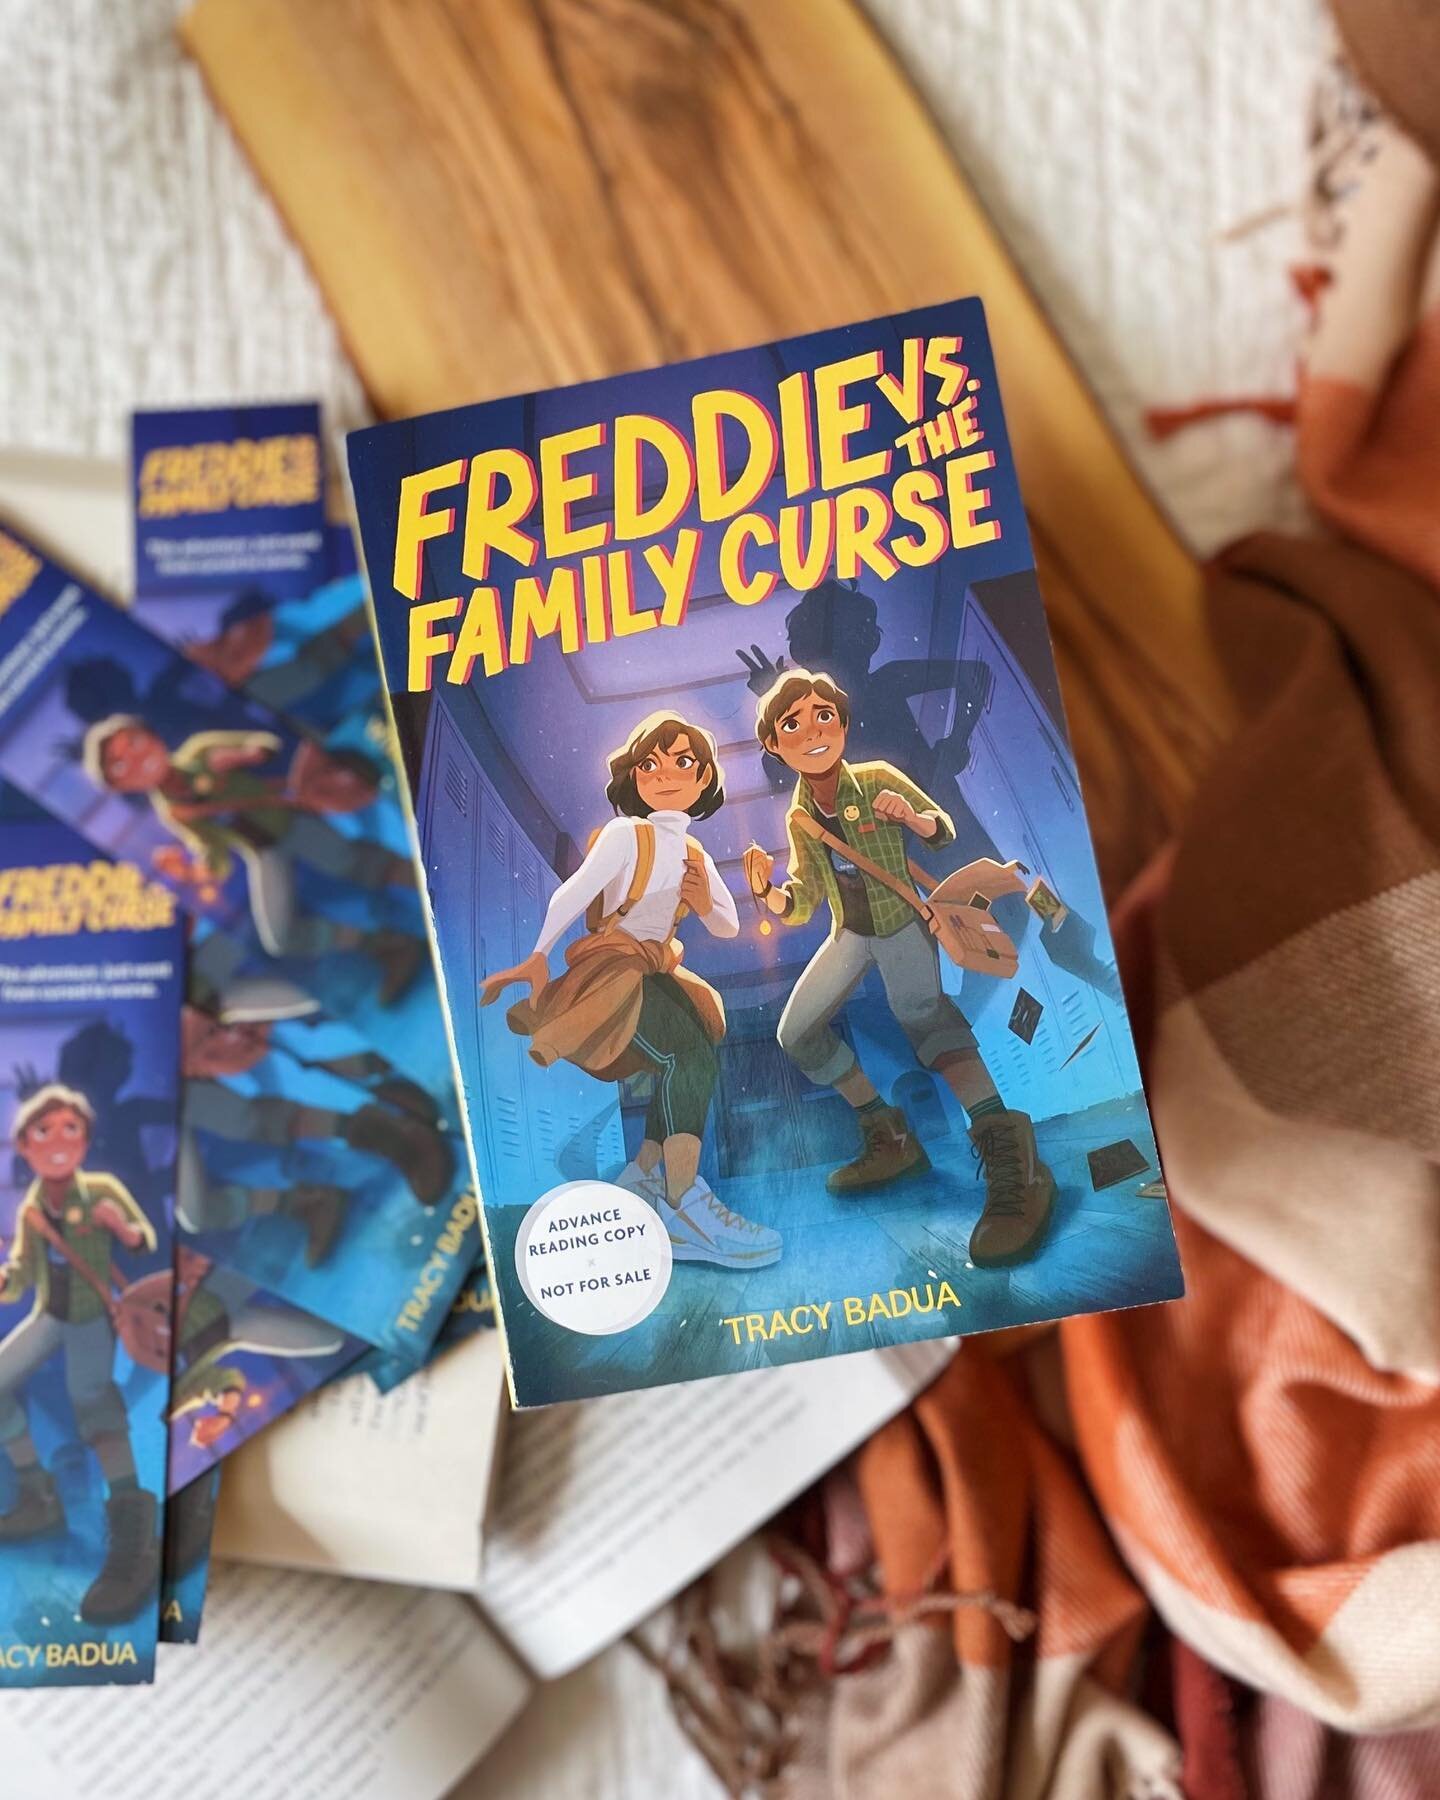 *BOOK TOUR STOP* for
FREDDIE VS. THE FAMILY CURSE!

I have been on a very strong middle-grade-fantasy-inspired-by-family-tradition-and-folklore kick lately and cannot tell you how excited I am to meet Freddie!

Freddie has just been trying to fly und